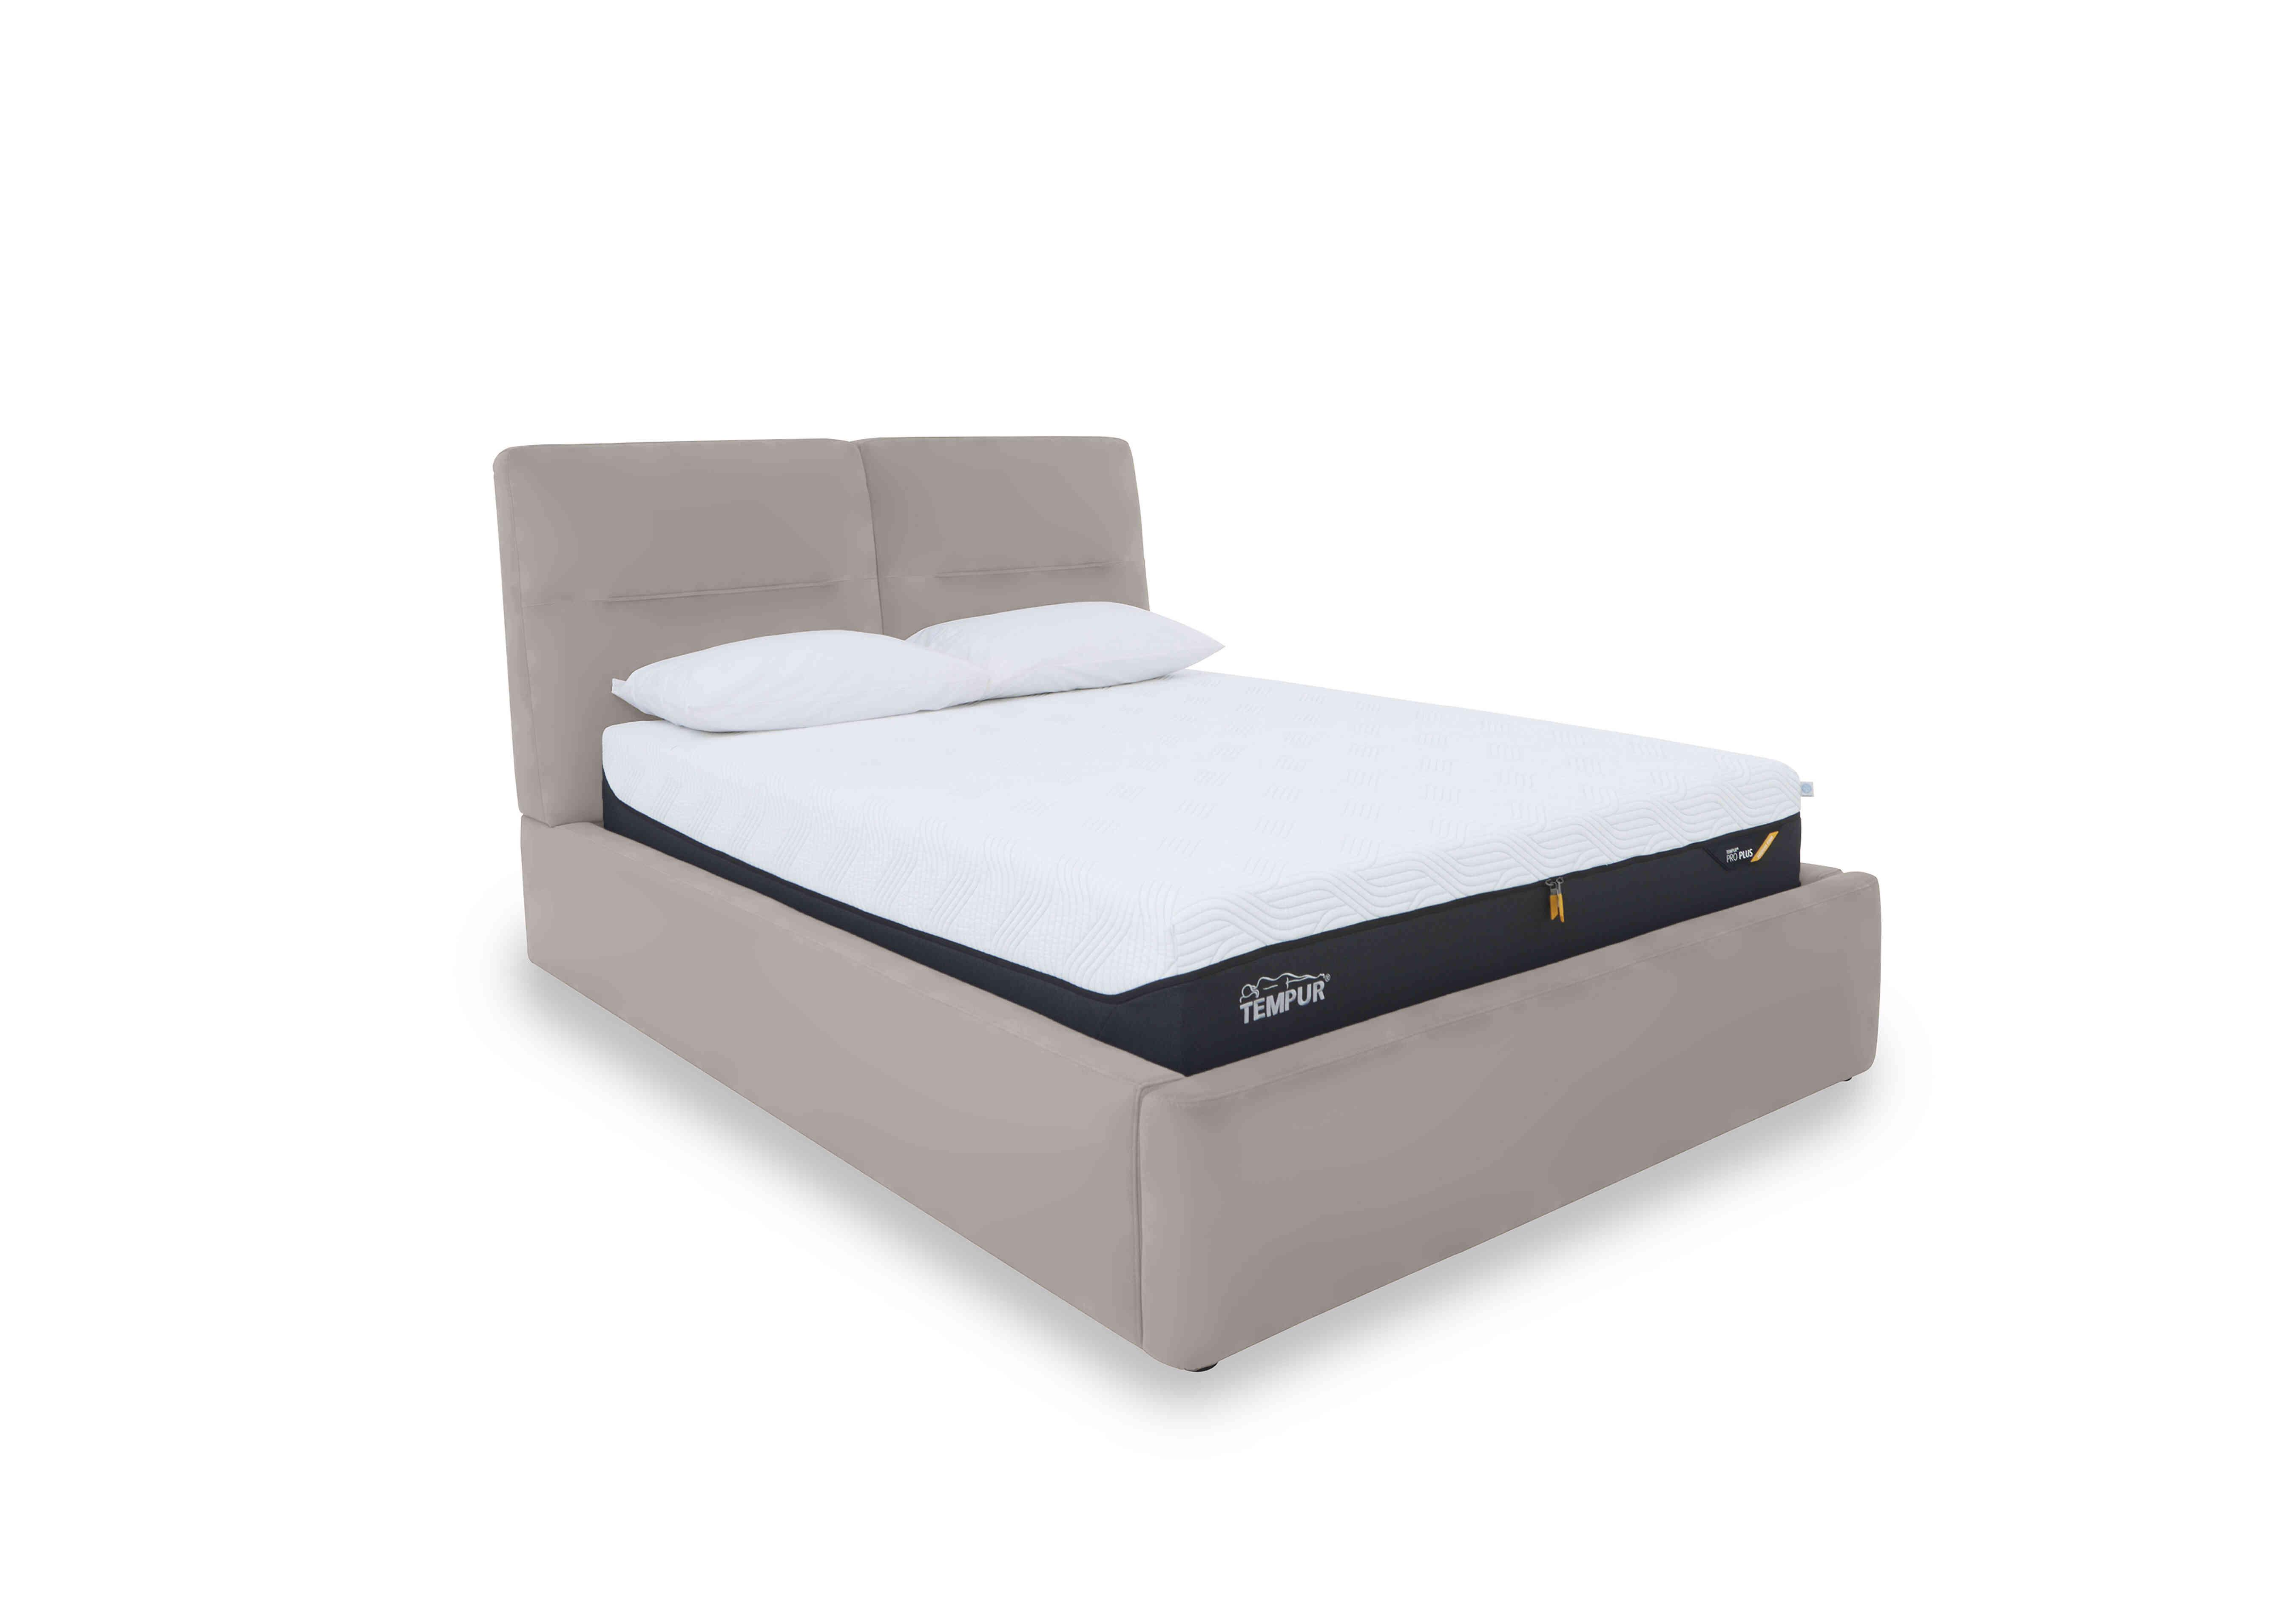 Stark Leather Manual Ottoman Bed Frame in Bv-946b Silver Grey on Furniture Village